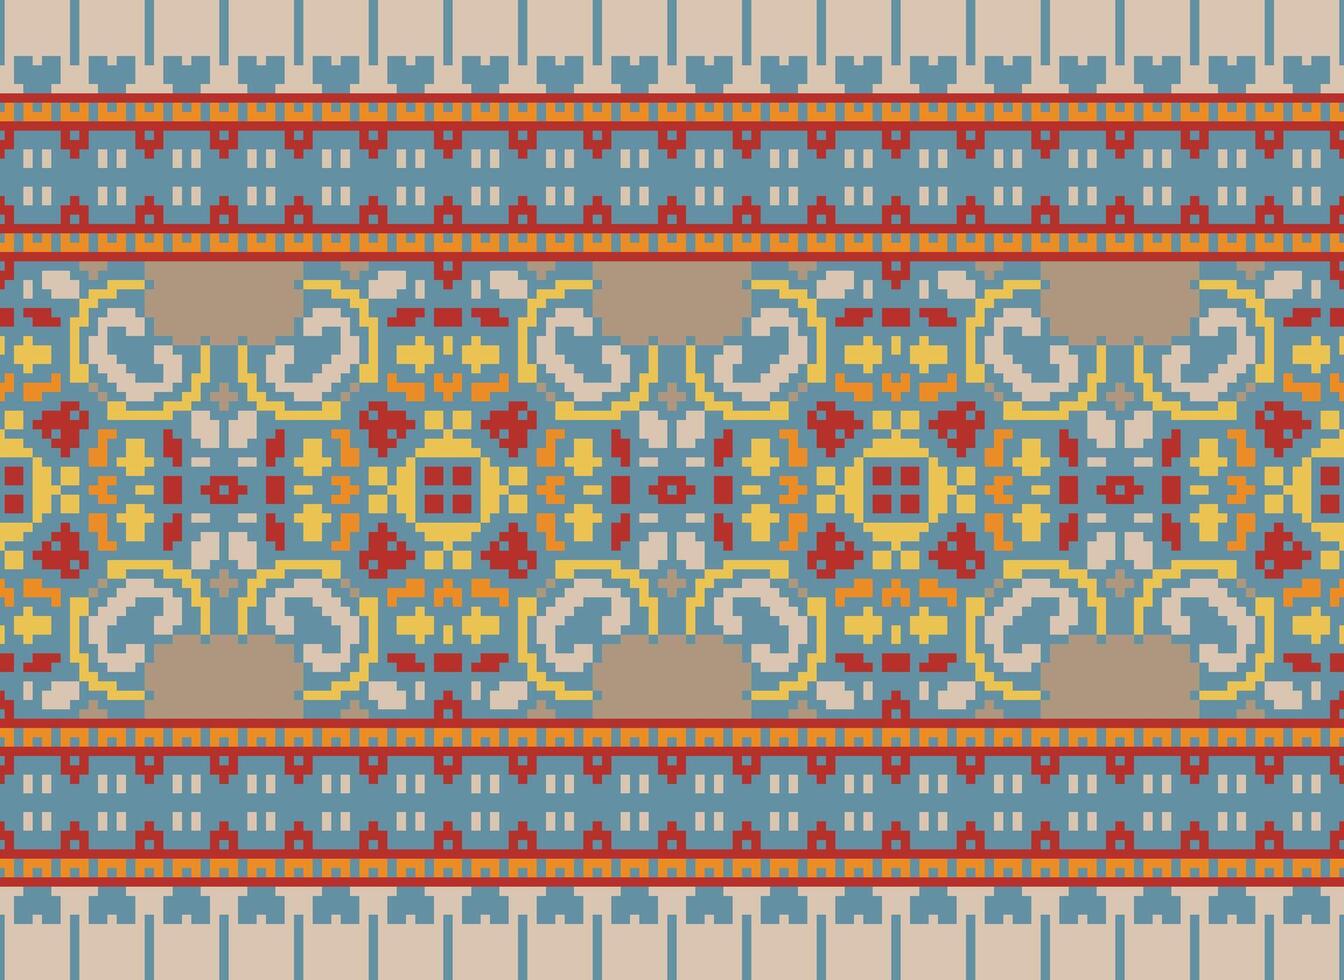 Pixel Cross Stitch pattern with Floral Designs. Traditional cross stitch needlework. Geometric Ethnic pattern, Embroidery, Textile ornamentation, fabric, Hand stitched pattern, pixel art. vector